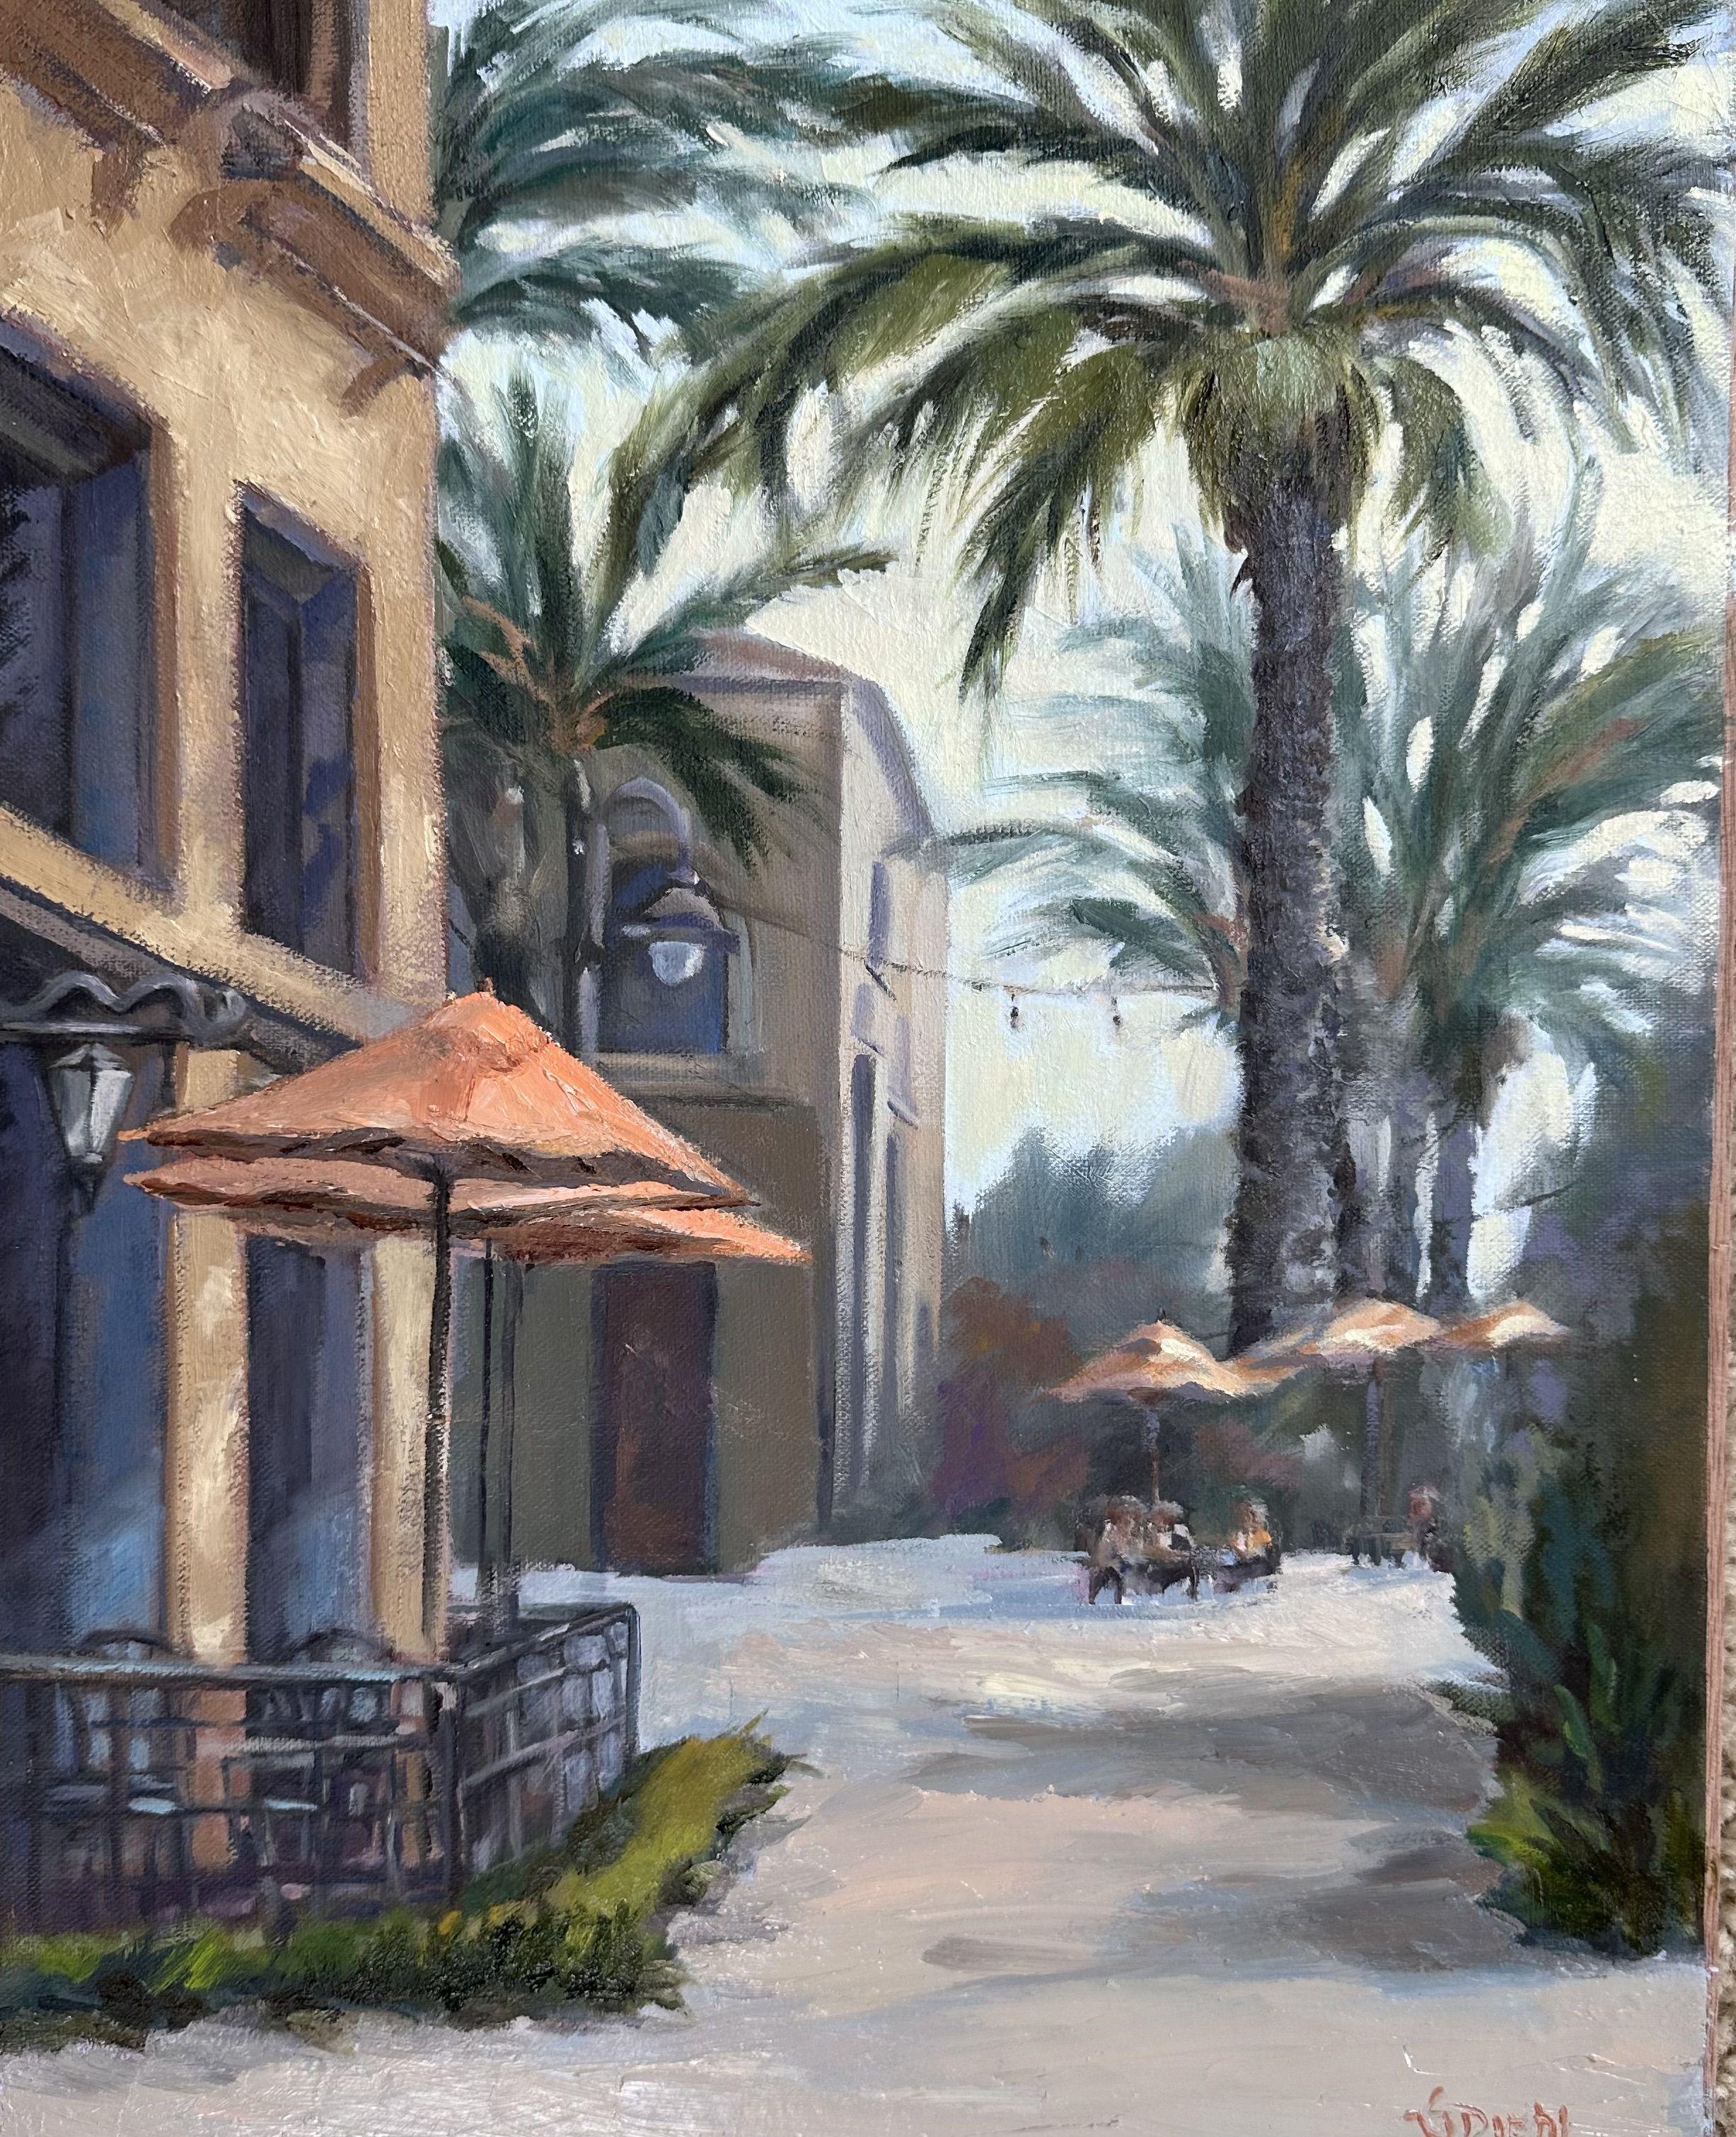 The bustling atmosphere of the Irvine market and its popularity for tasty sandwiches makes for an interesting subject to paint. Painting at an early time before the lunch rush allowed me to capture the scene with fewer people in the way, giving a